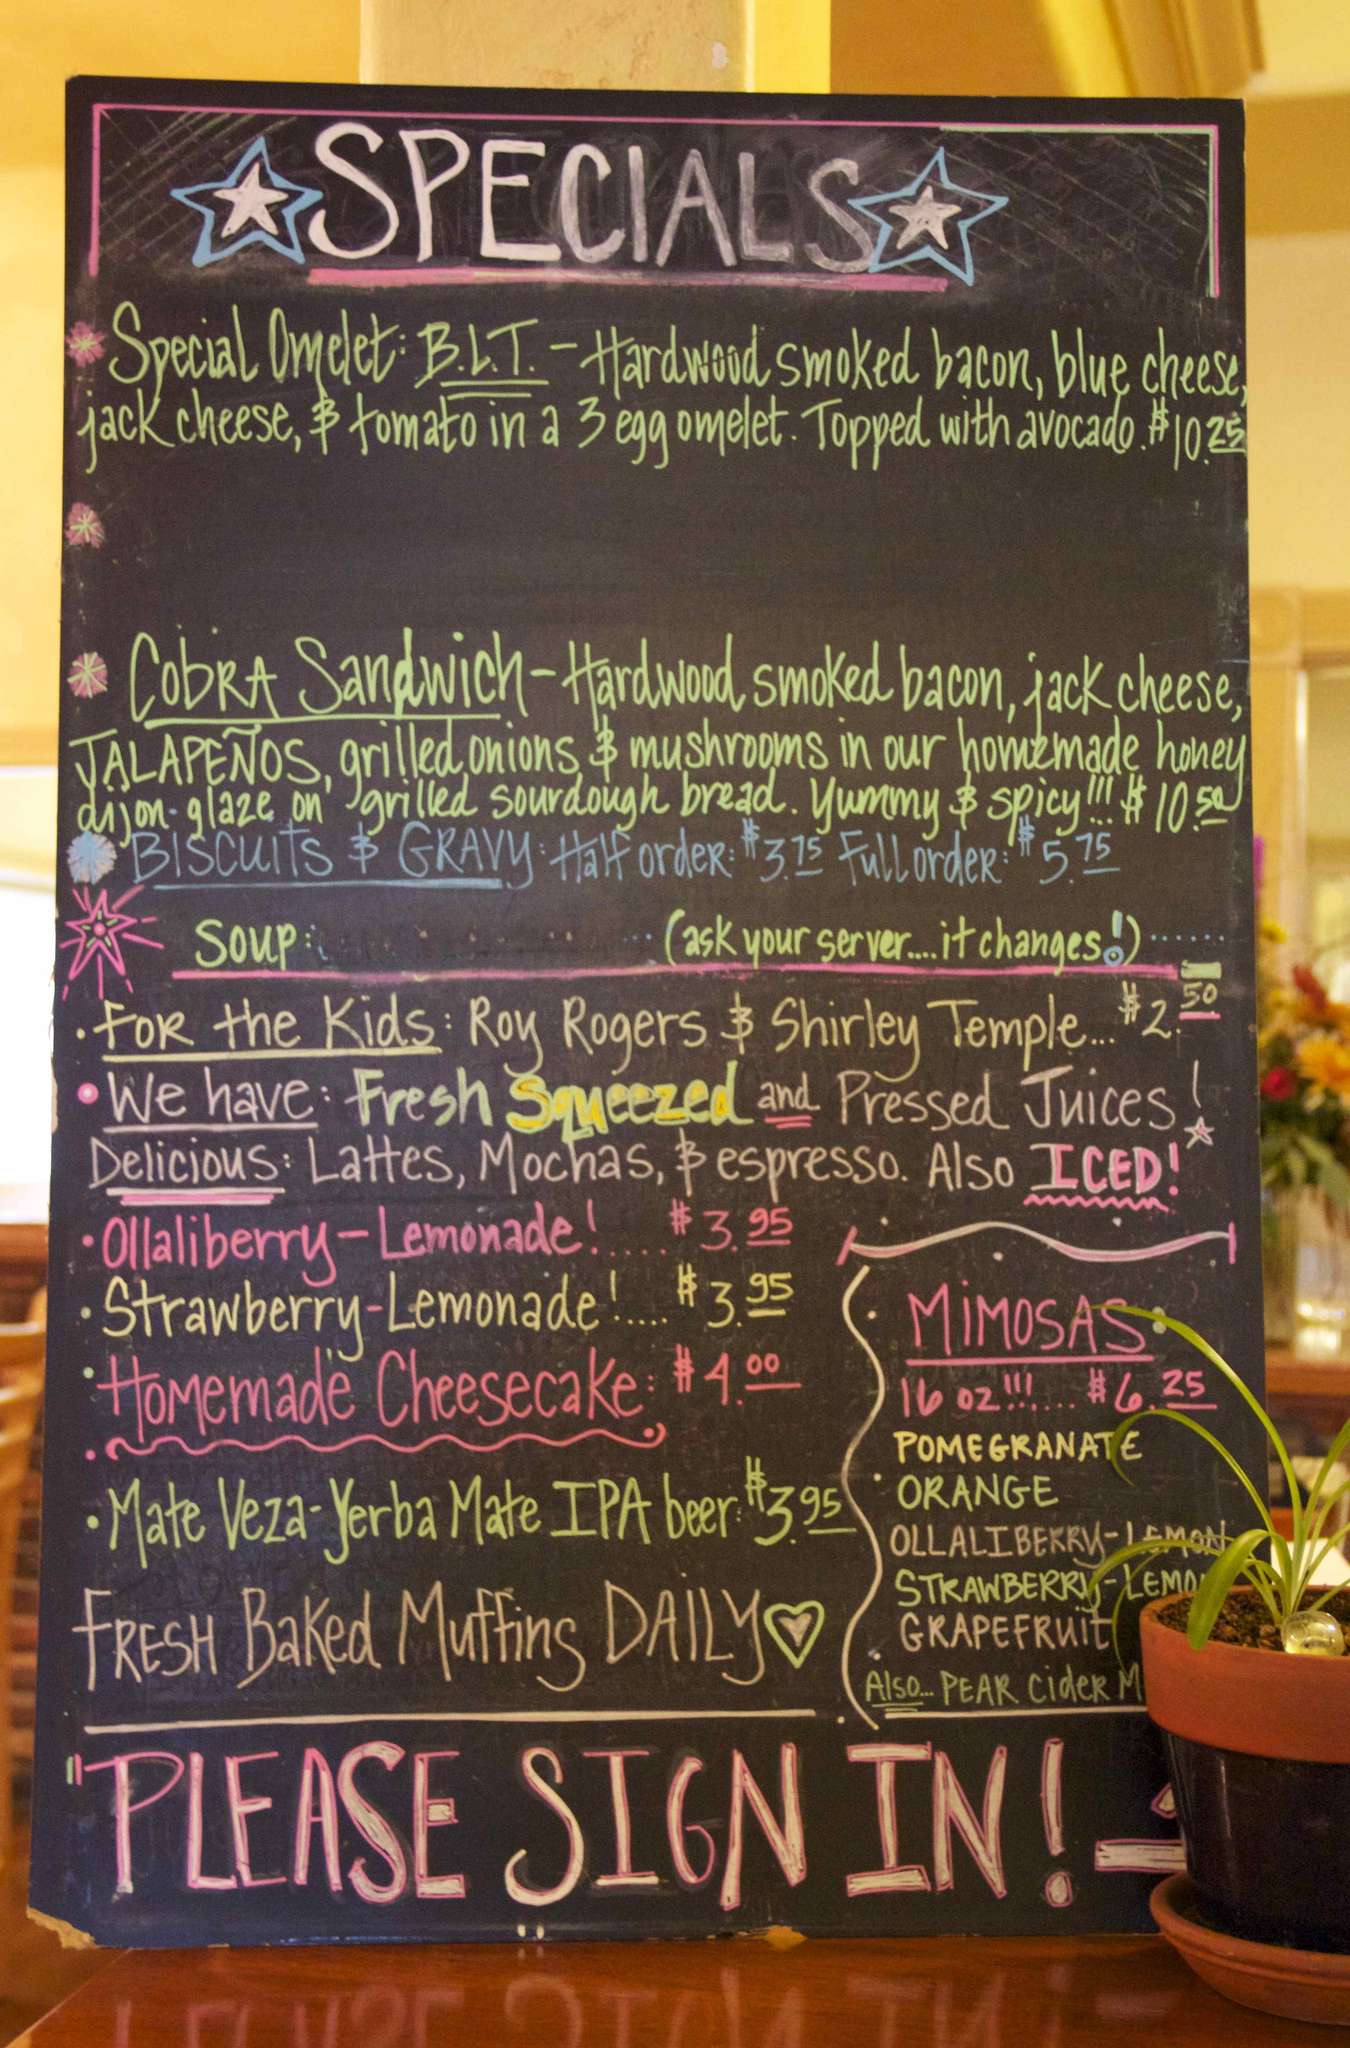 Menu at South Pine Cafe, Grass Valley